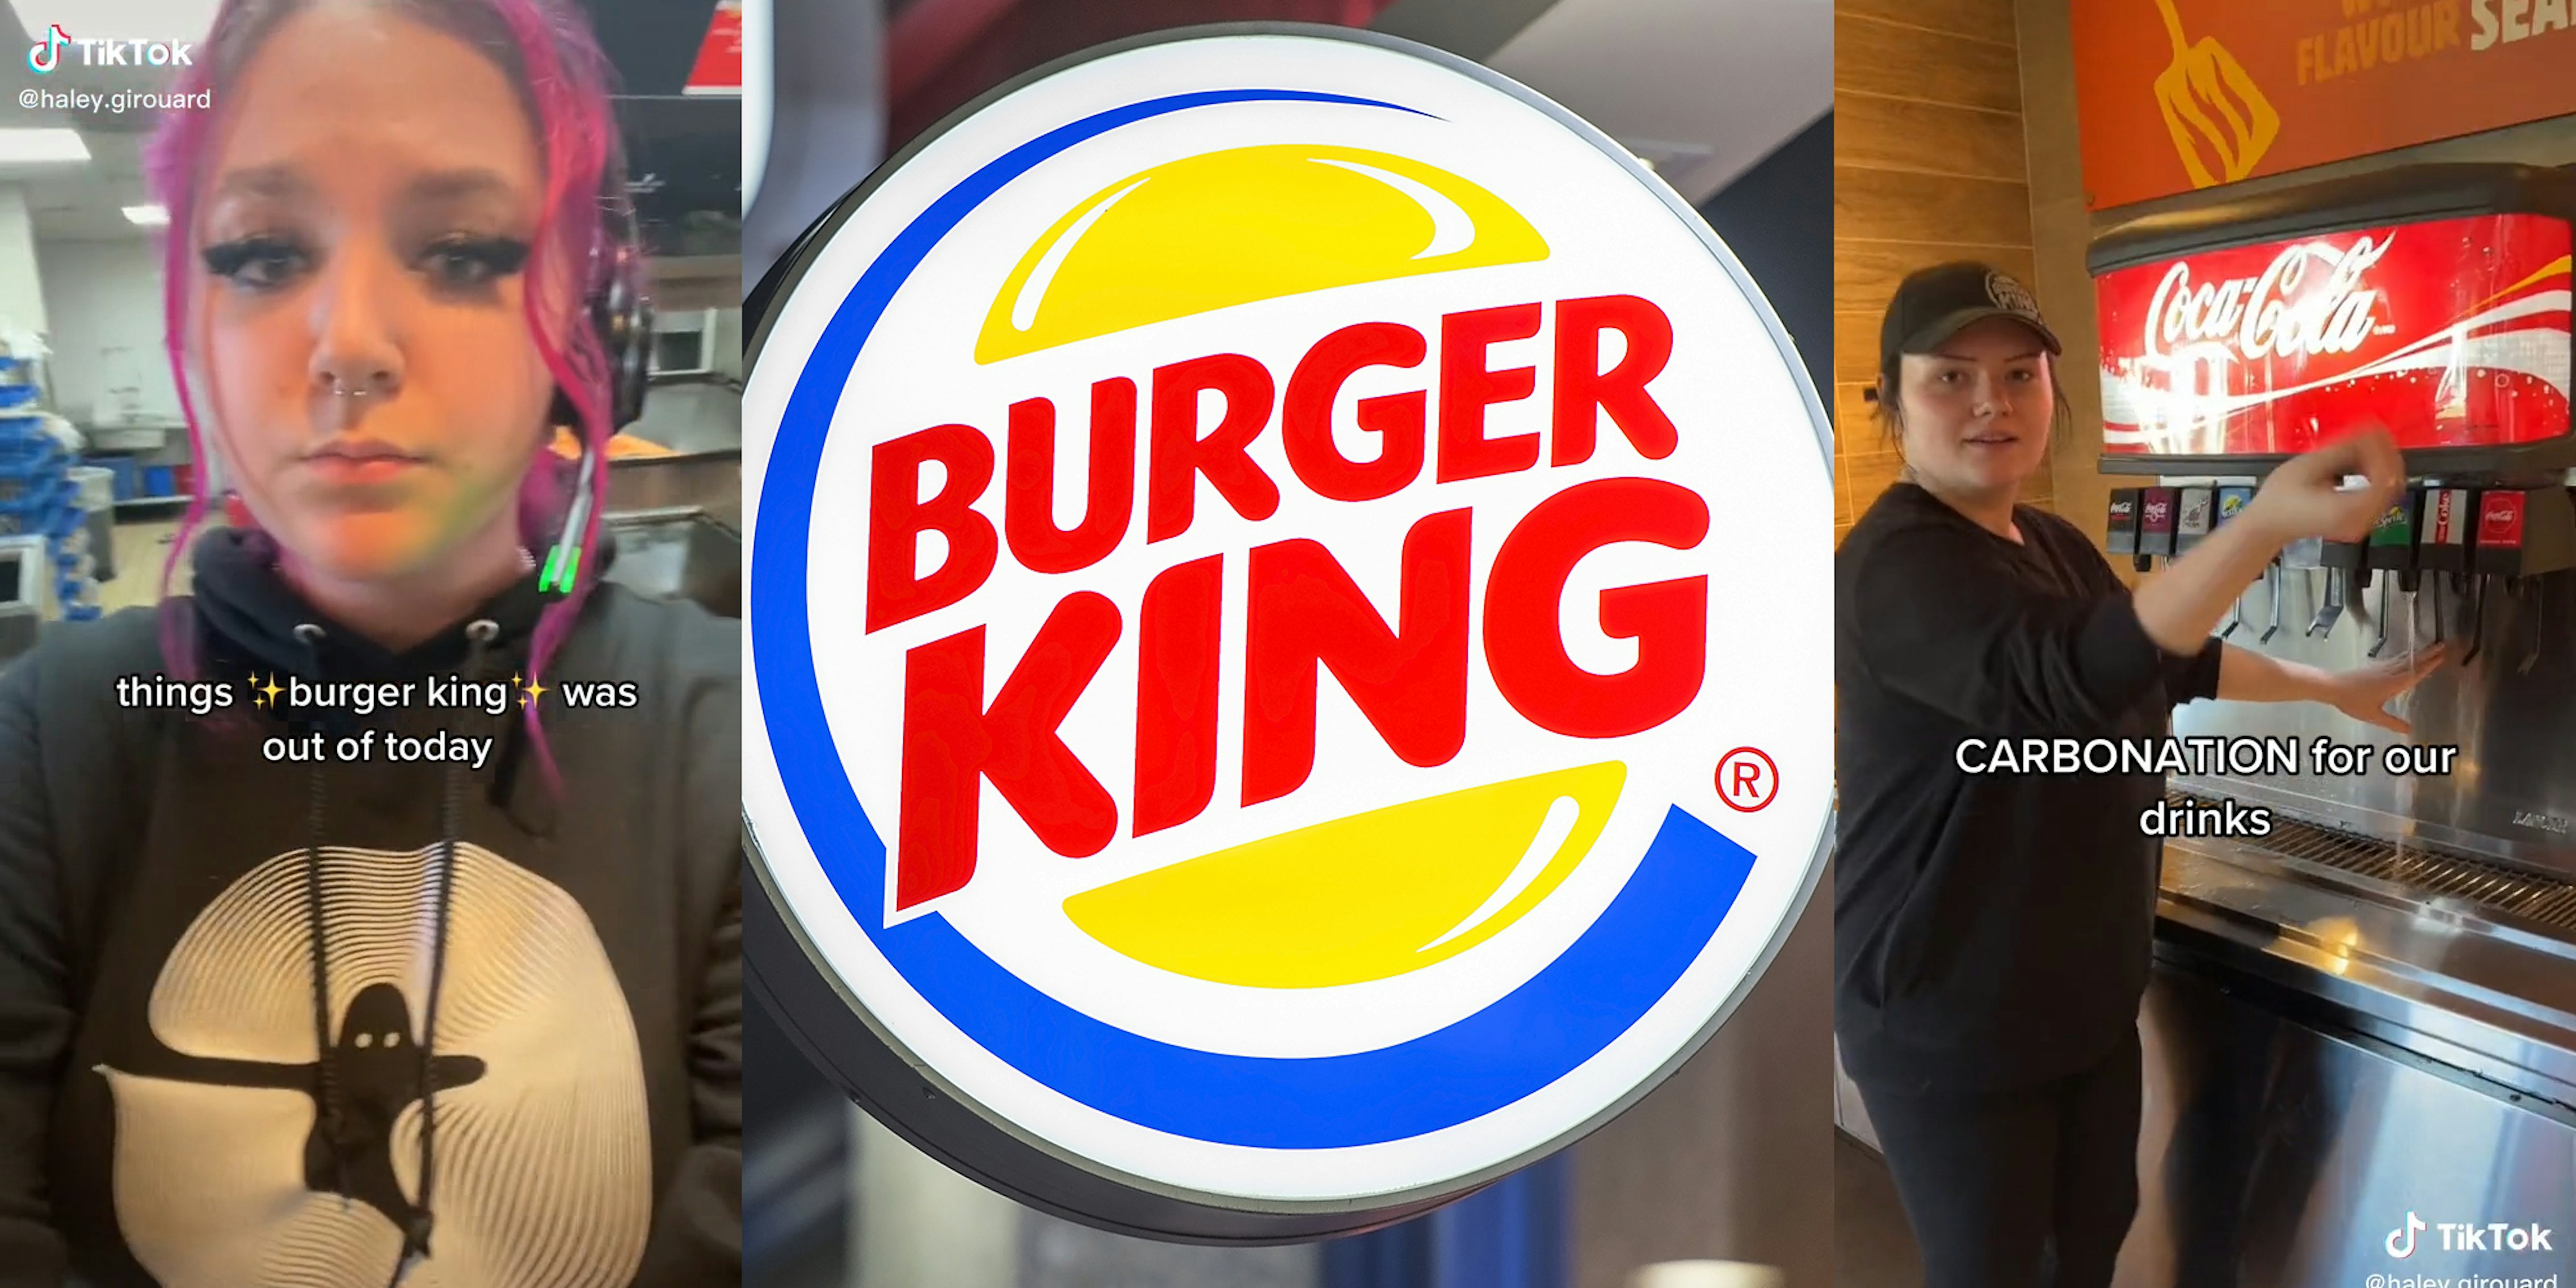 burger king employees with caption 'things burger king was out of today' and 'carbonation for our drinks' (l&r) burger king sign (c)